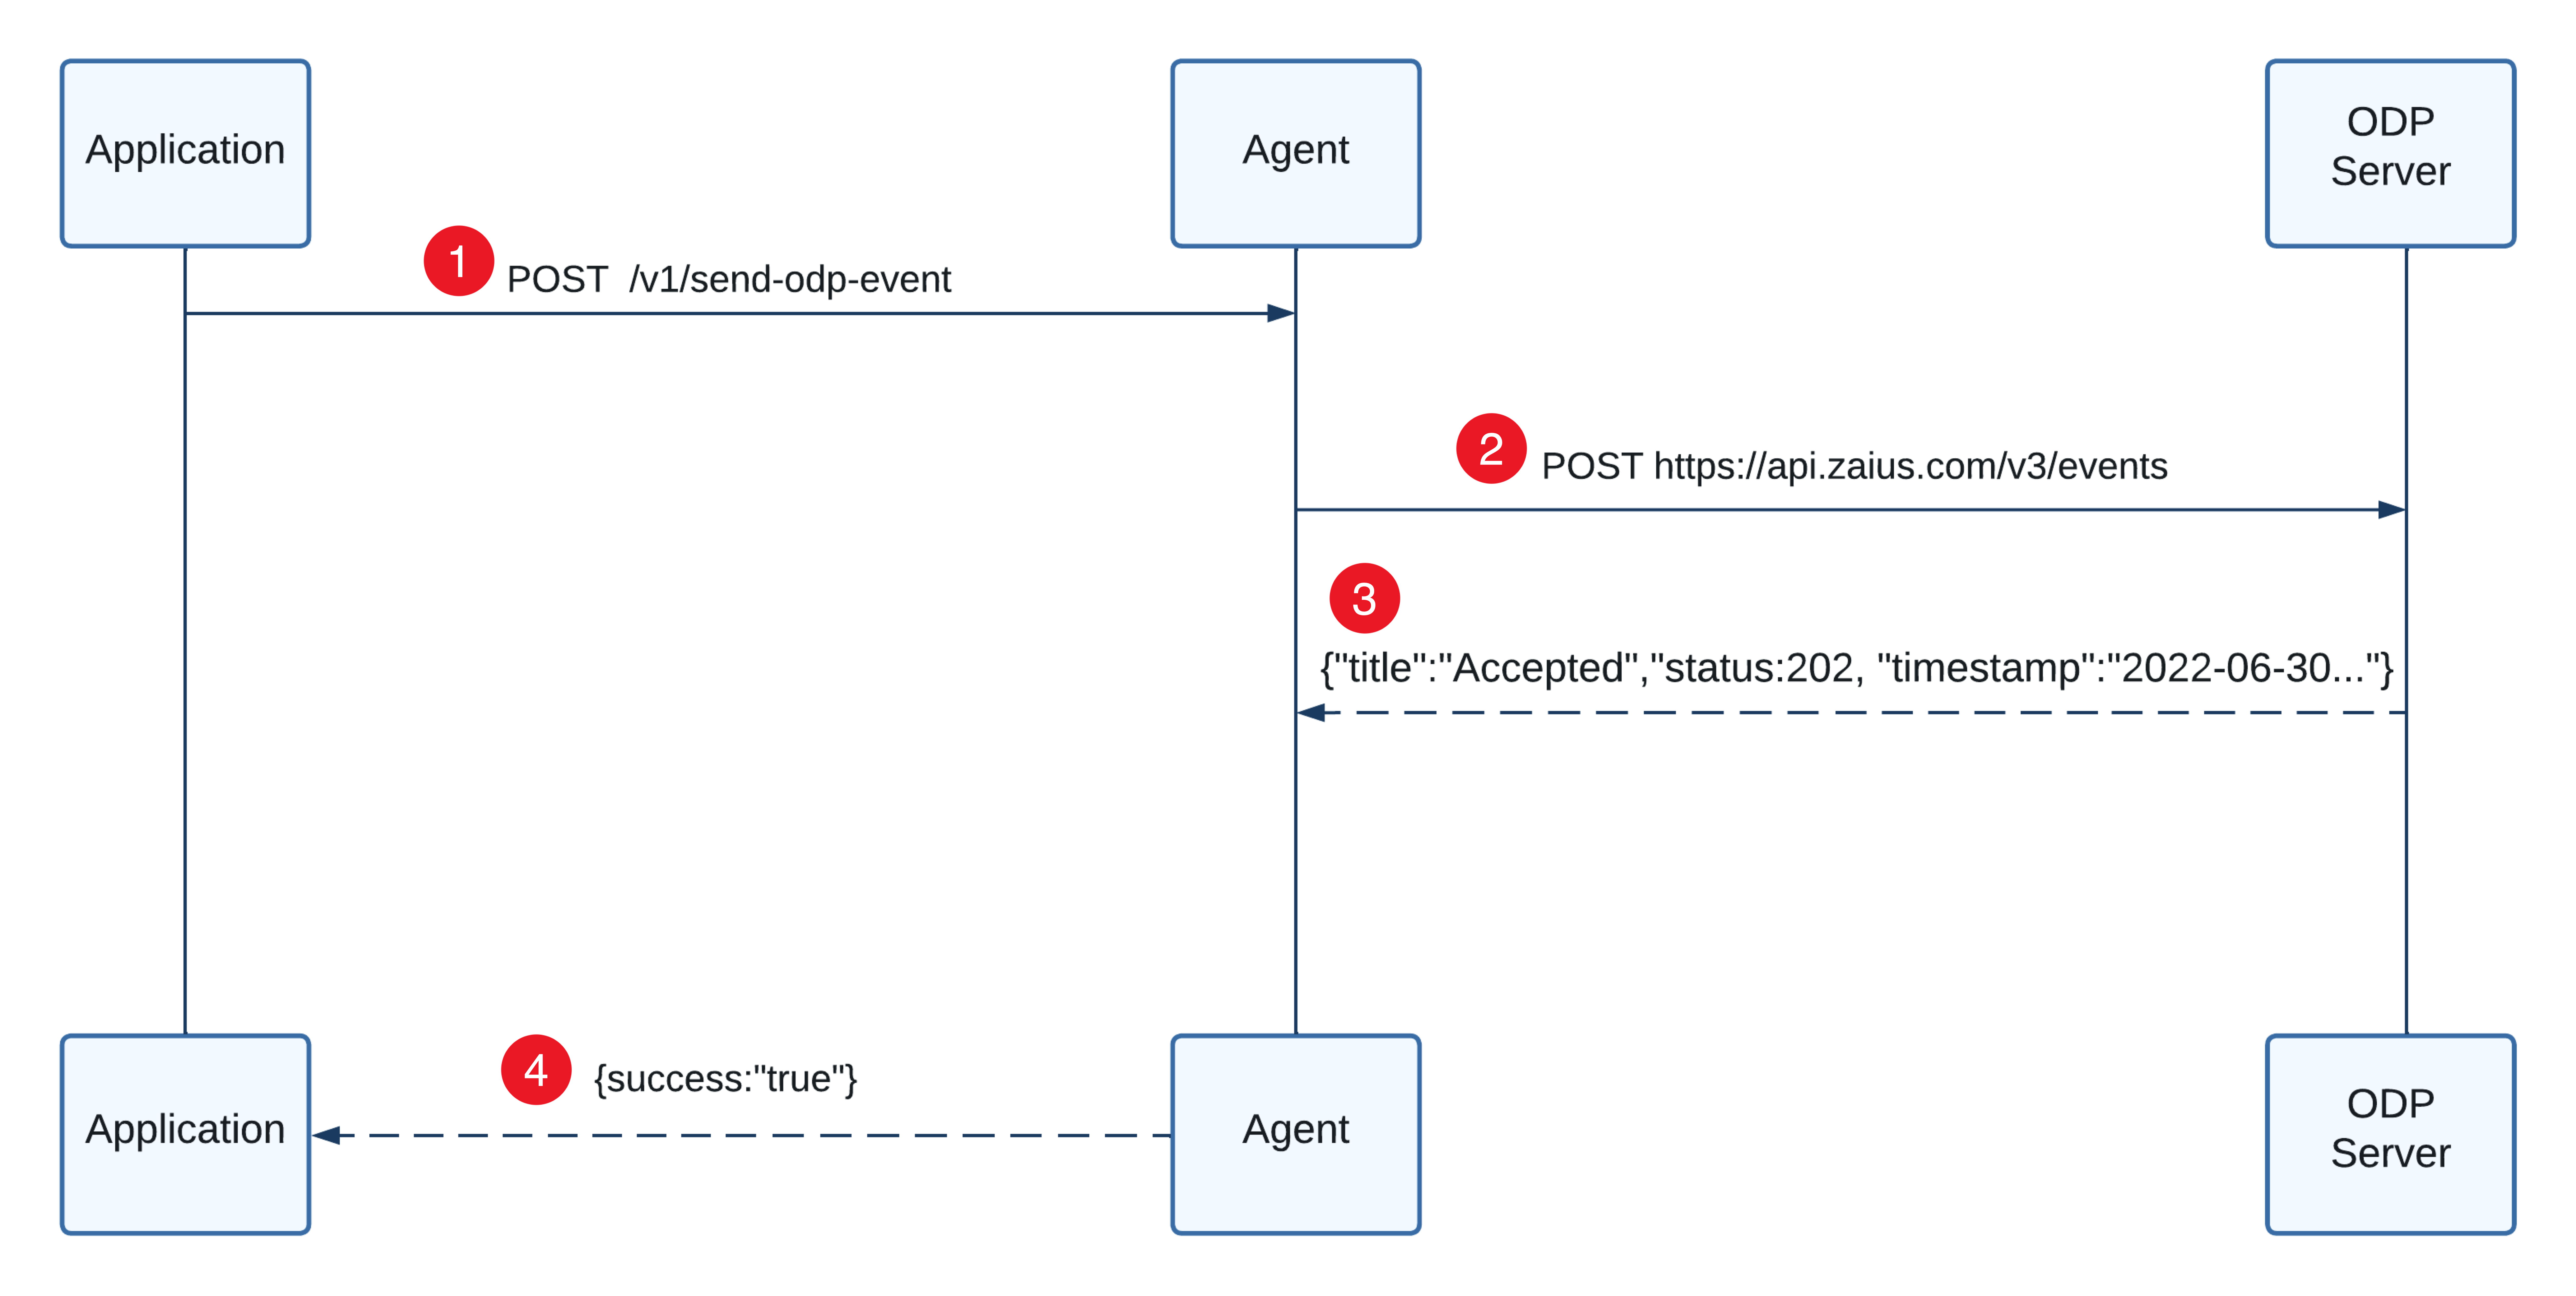 Network diagram of calls between Agent and ODP